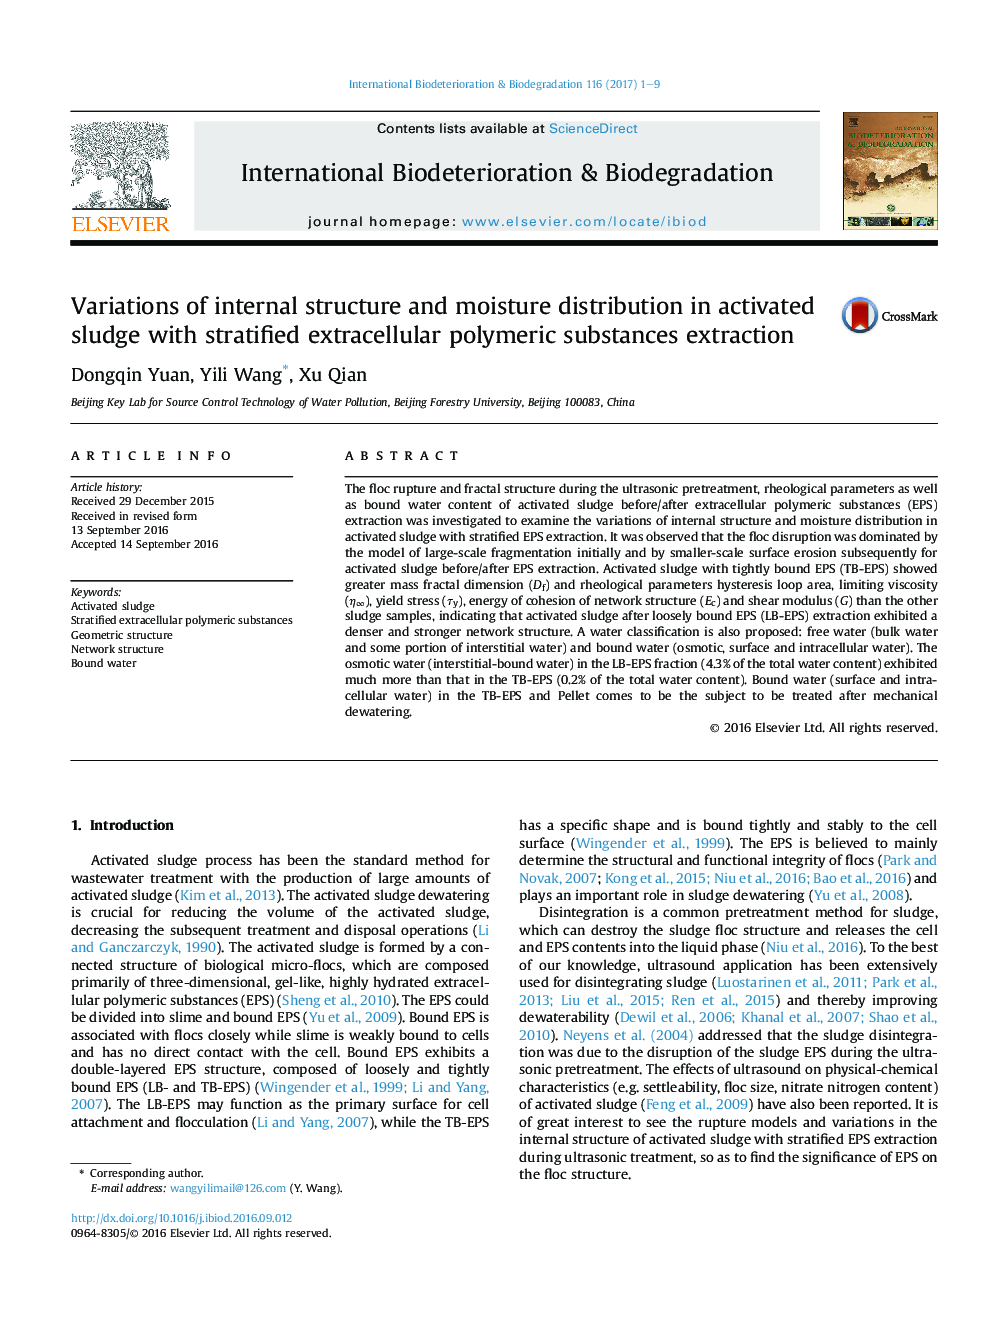 Variations of internal structure and moisture distribution in activated sludge with stratified extracellular polymeric substances extraction